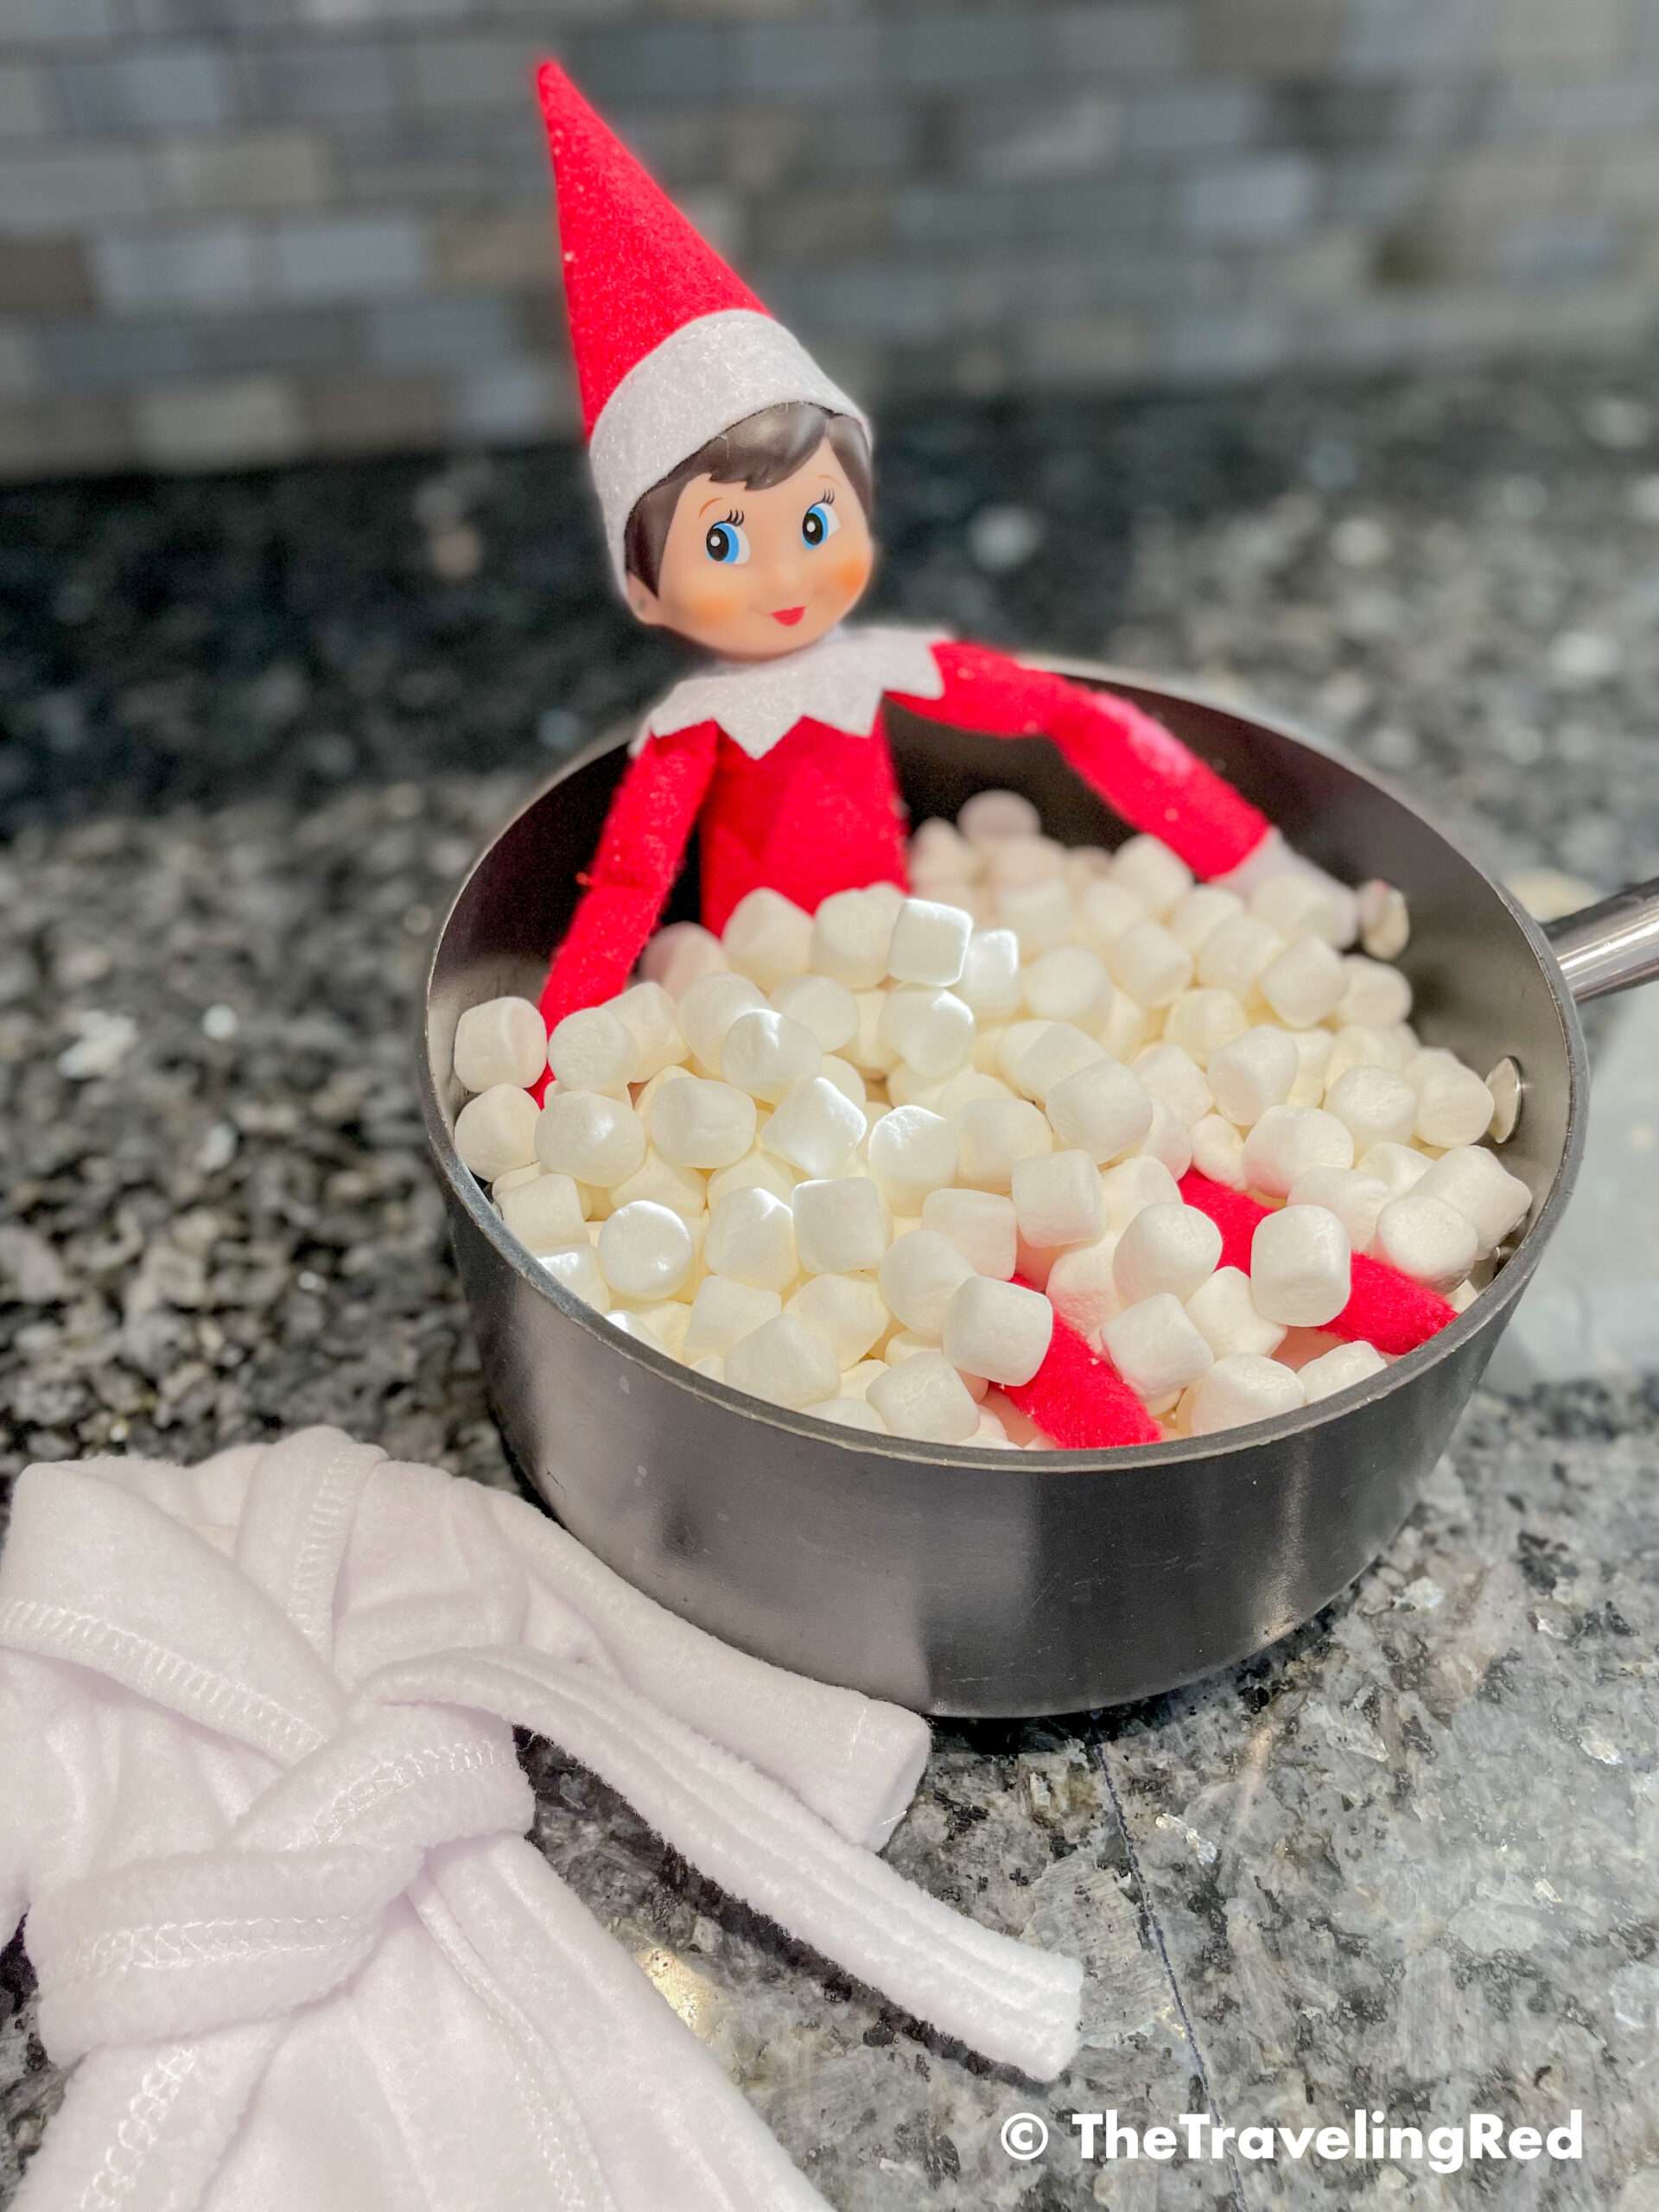 Naughty Elf on the shelf turned a pot into a hot tub. Fun and easy elf on the shelf ideas for a naughty elf that are quick and easy using things you have at home.